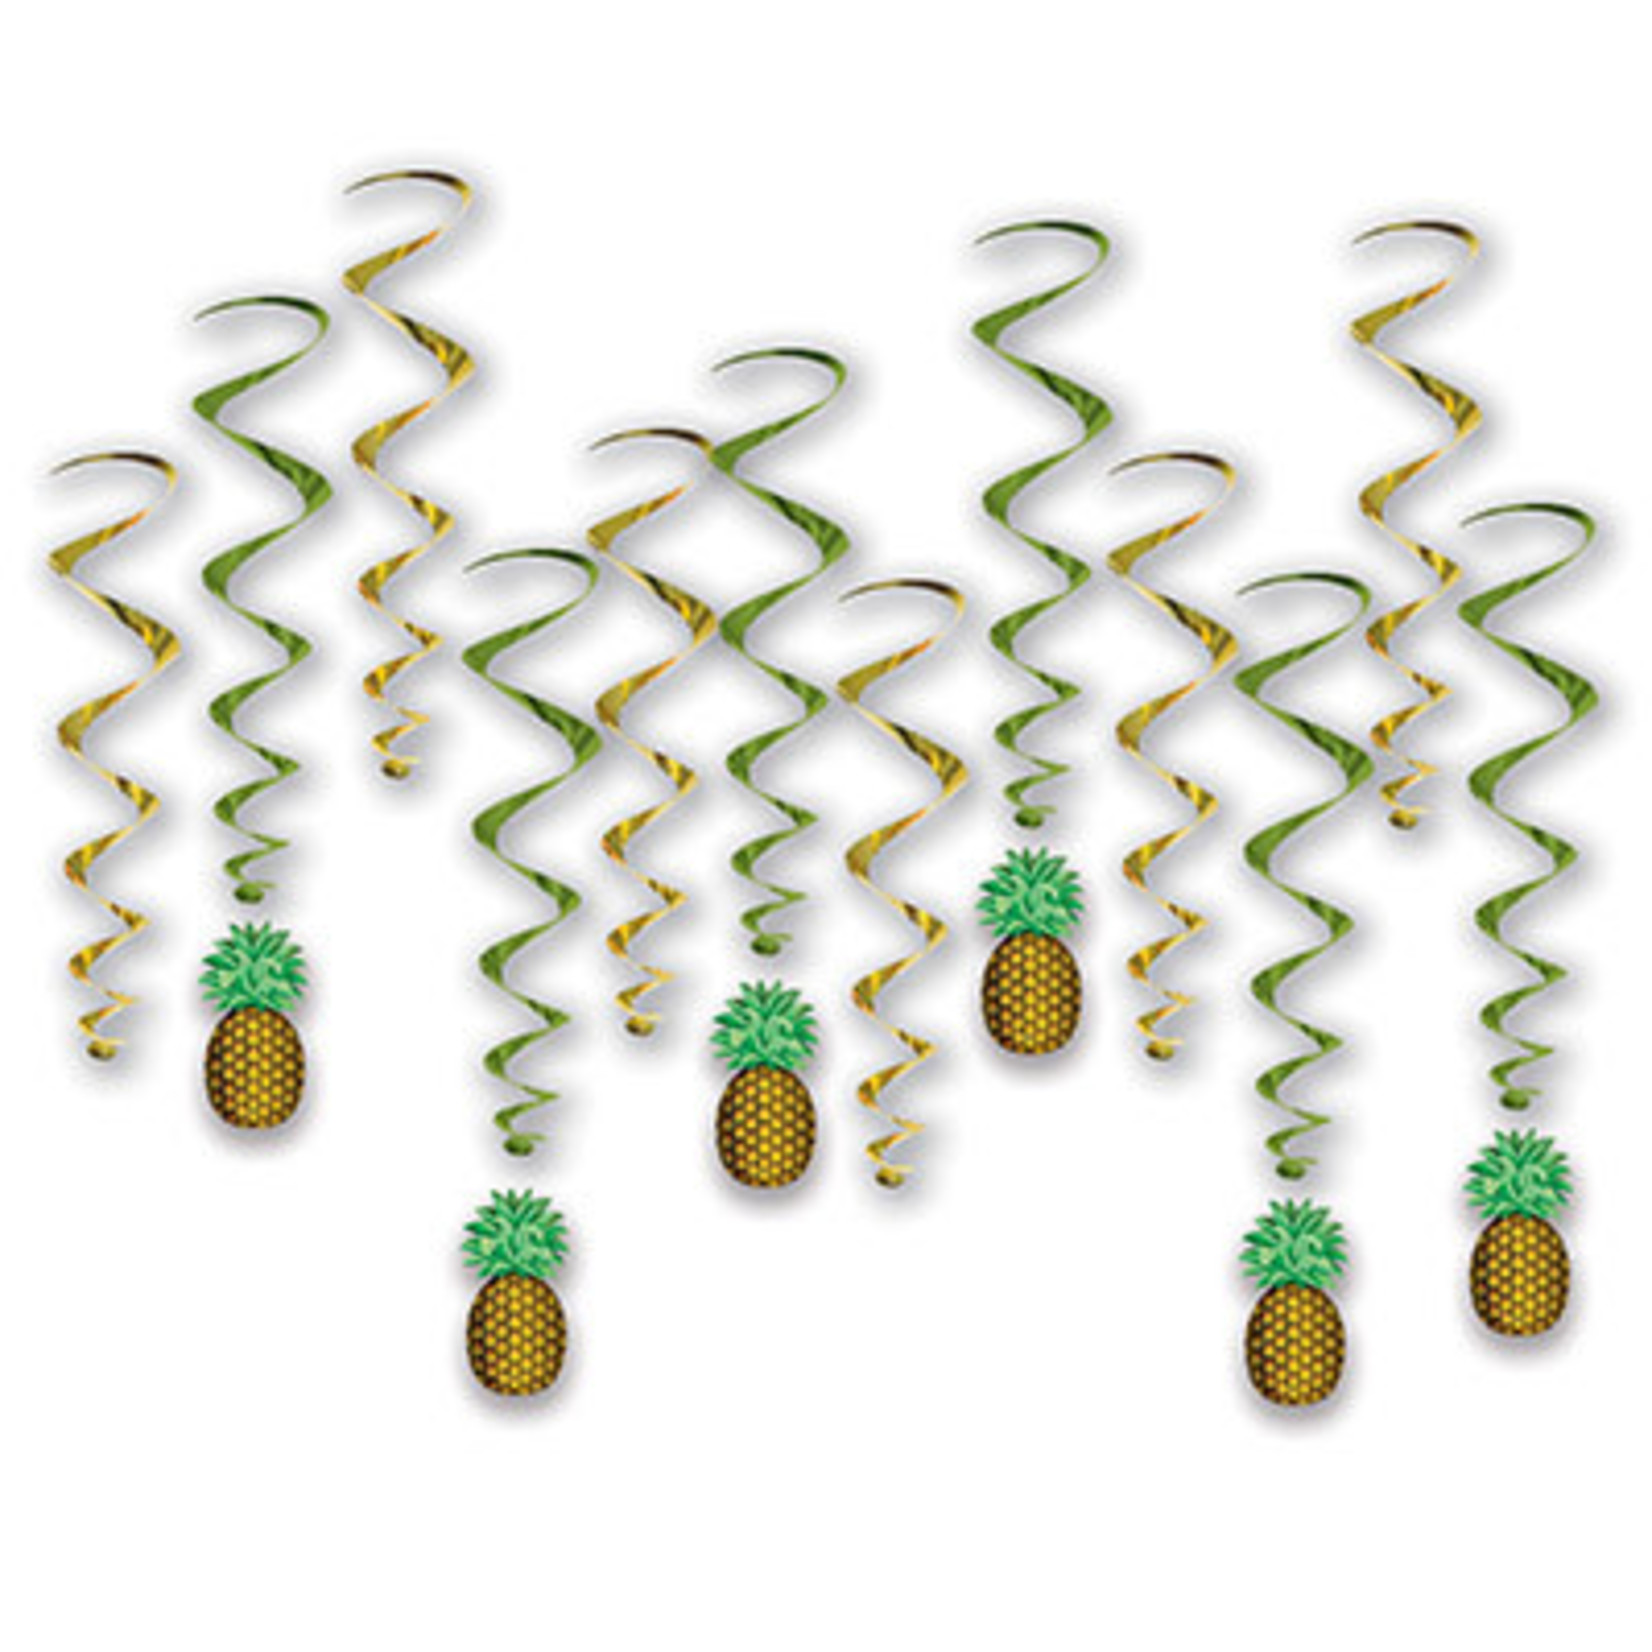 Beistle Pineapple Whirl Decorations - 12ct.